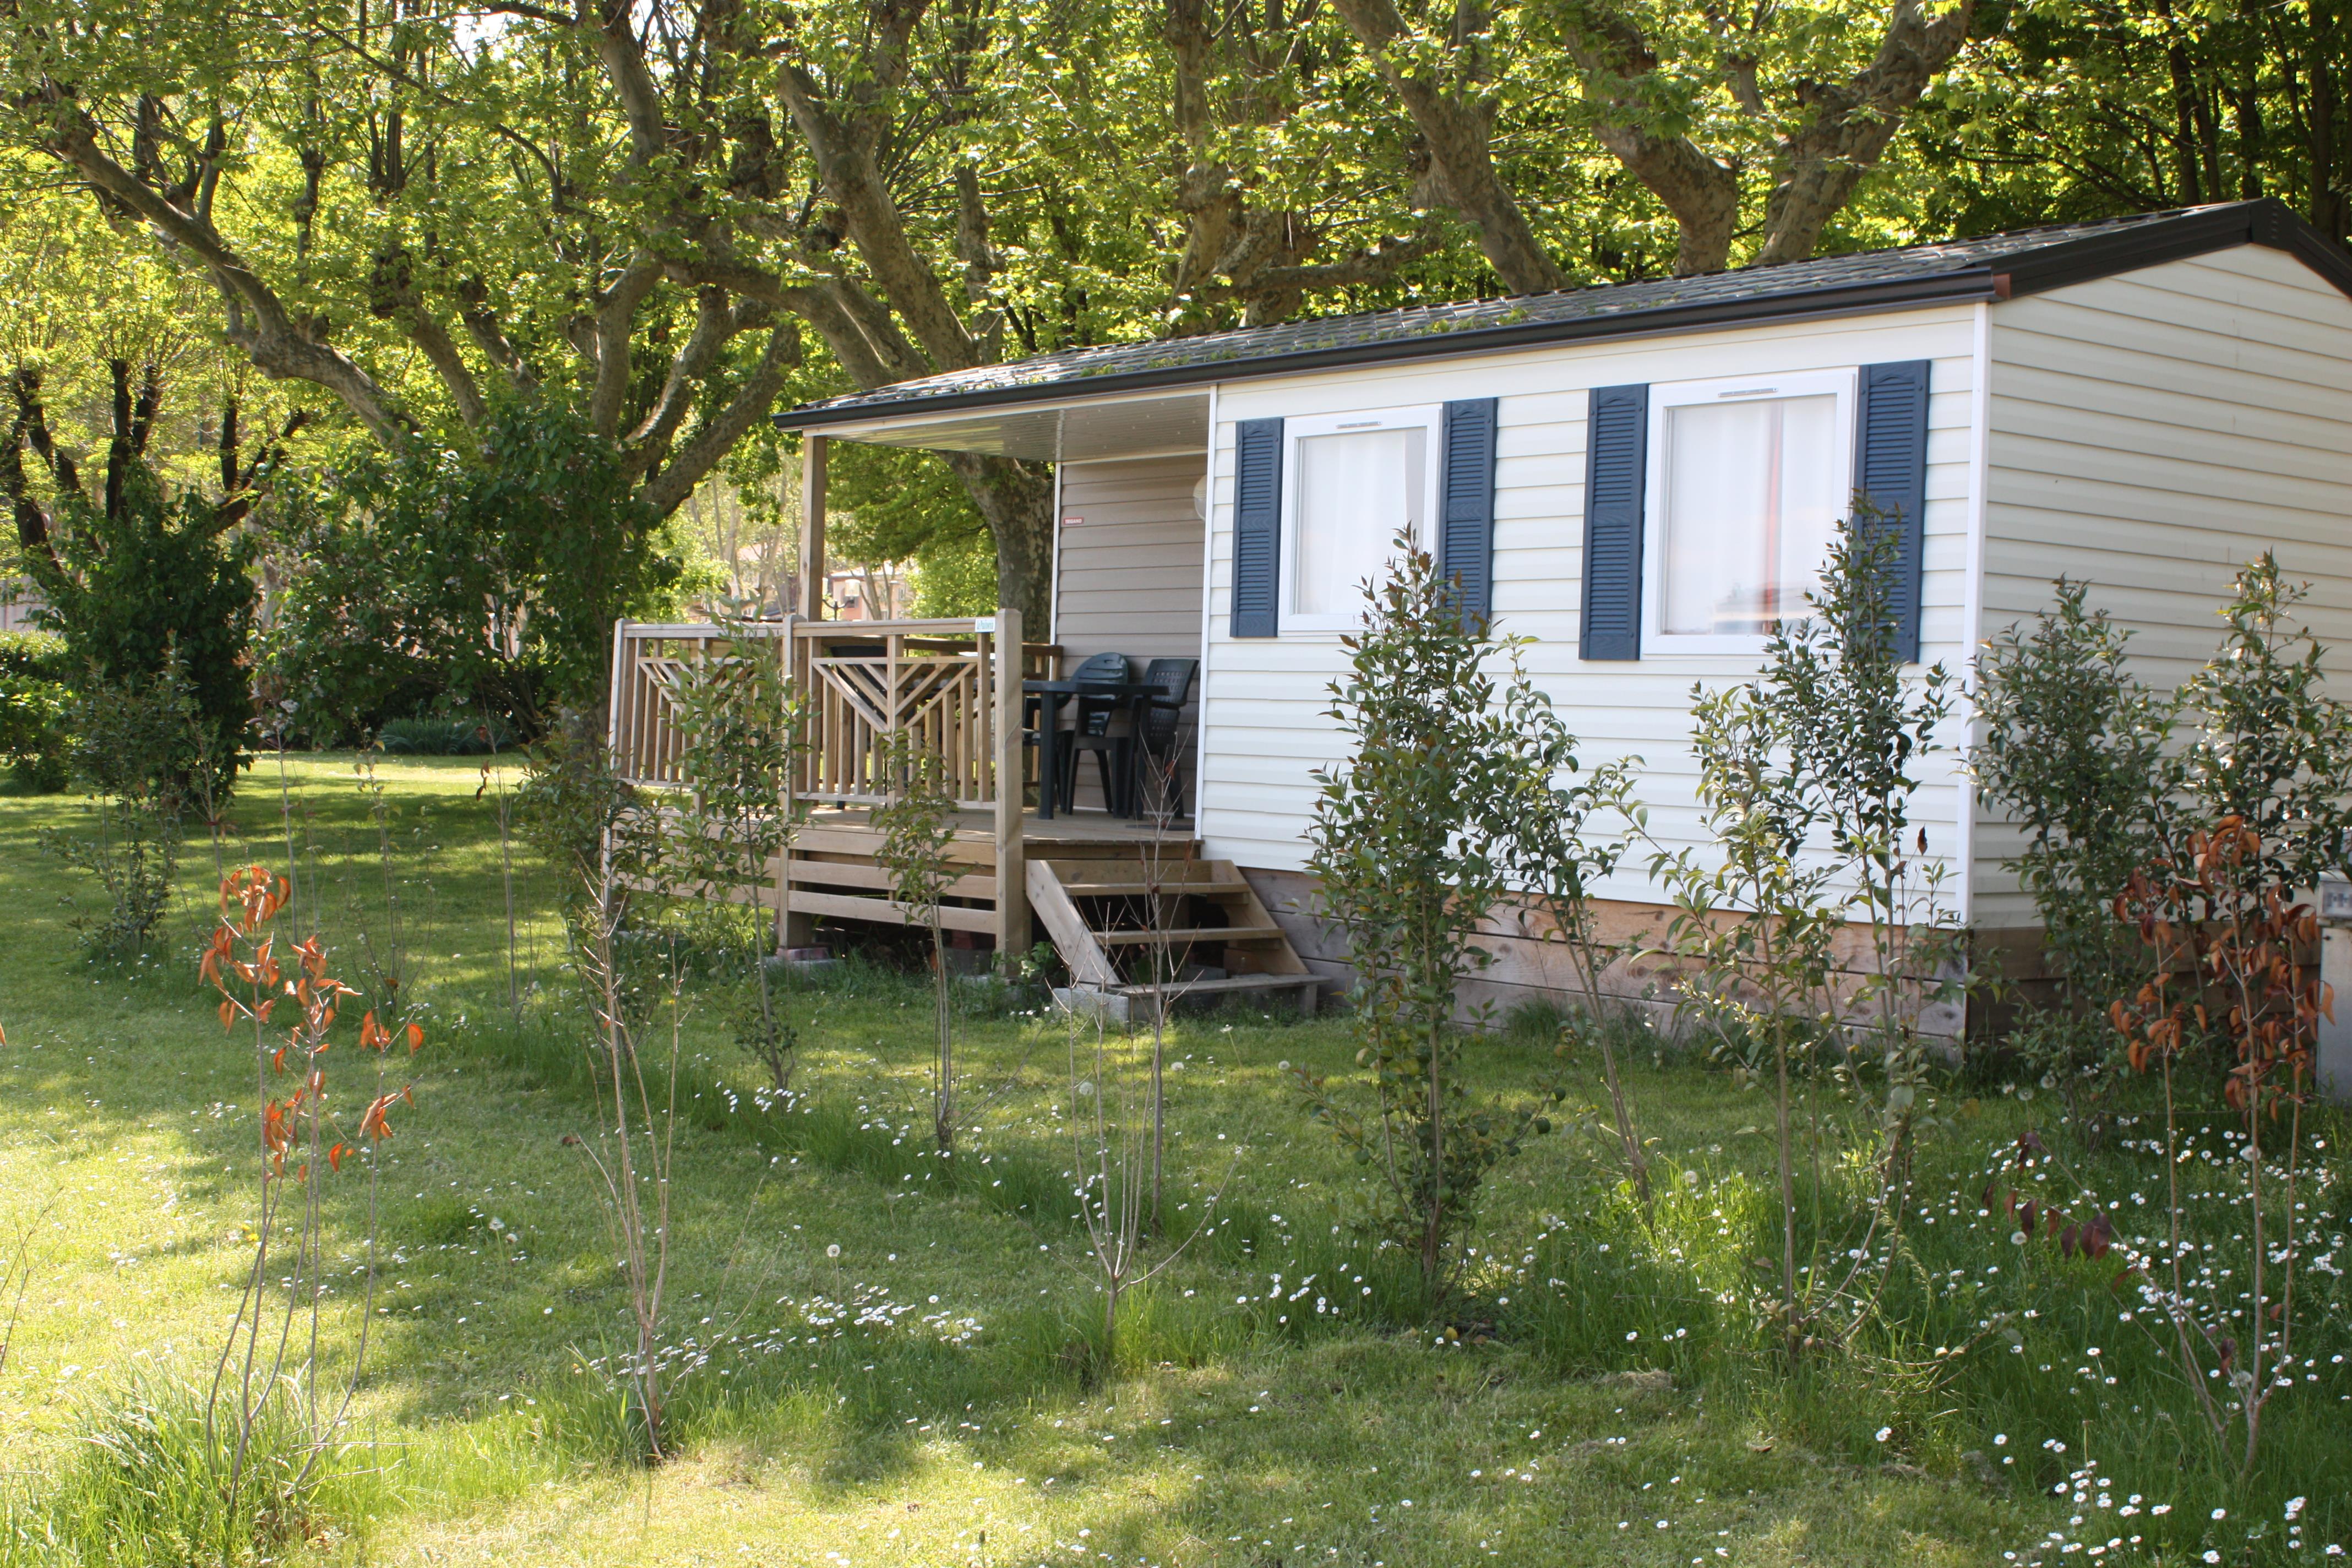 Accommodation - Mobilhome 3/4 Pers. 29 M2, 2 Bedrooms, Bathroom, Wc, With Decking And Air-Conditioning - Camping Le Rhône